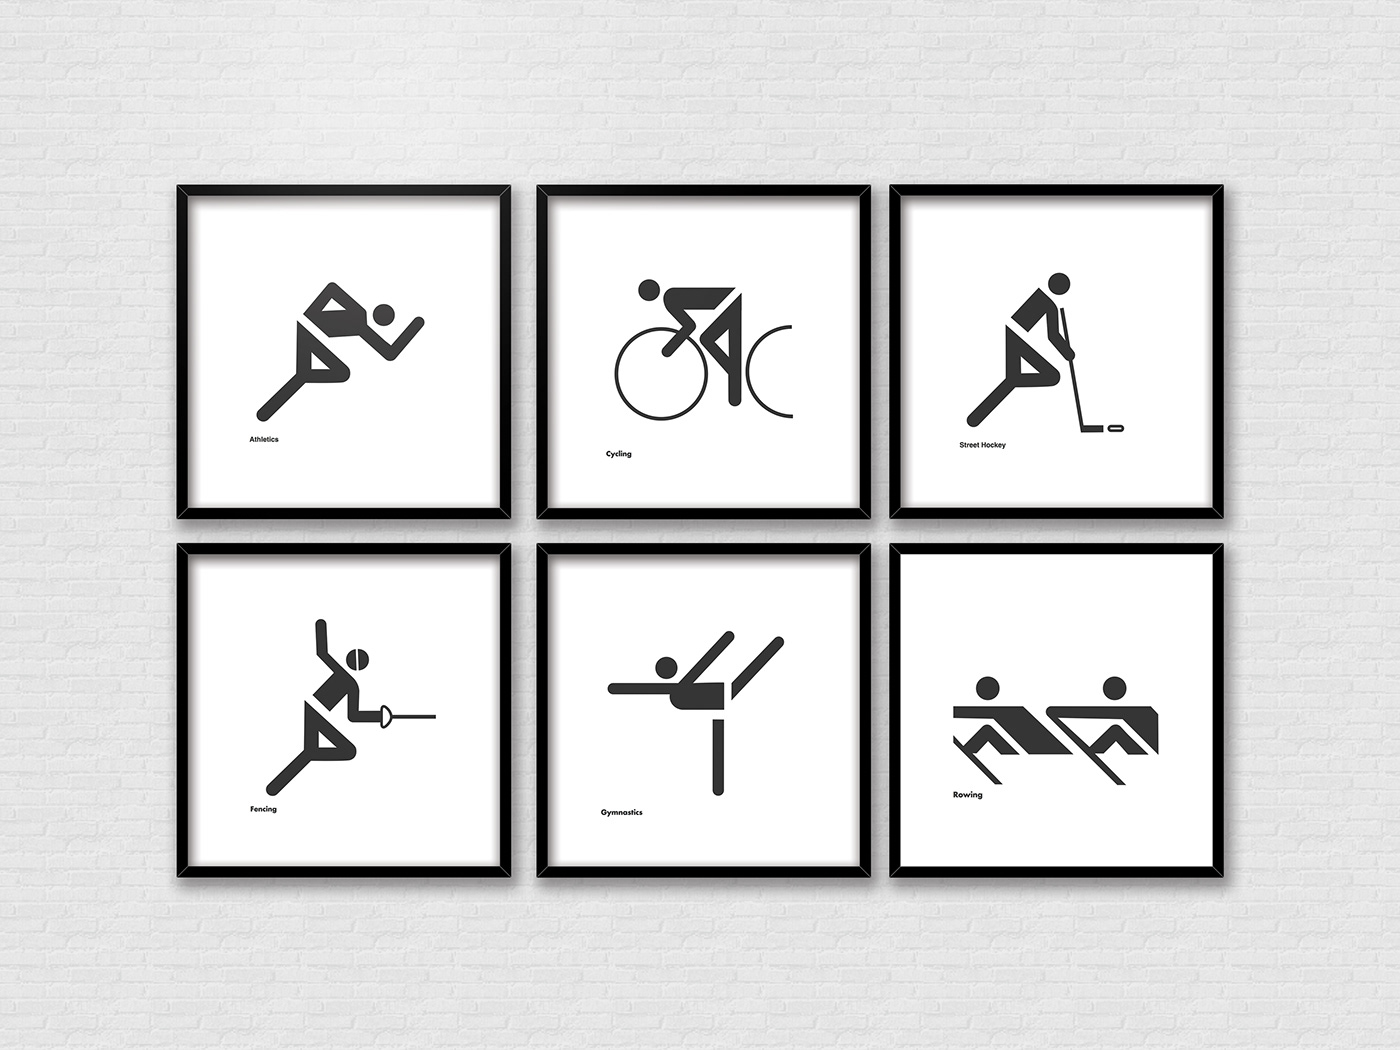 pictograms Olympic icons icons logos design